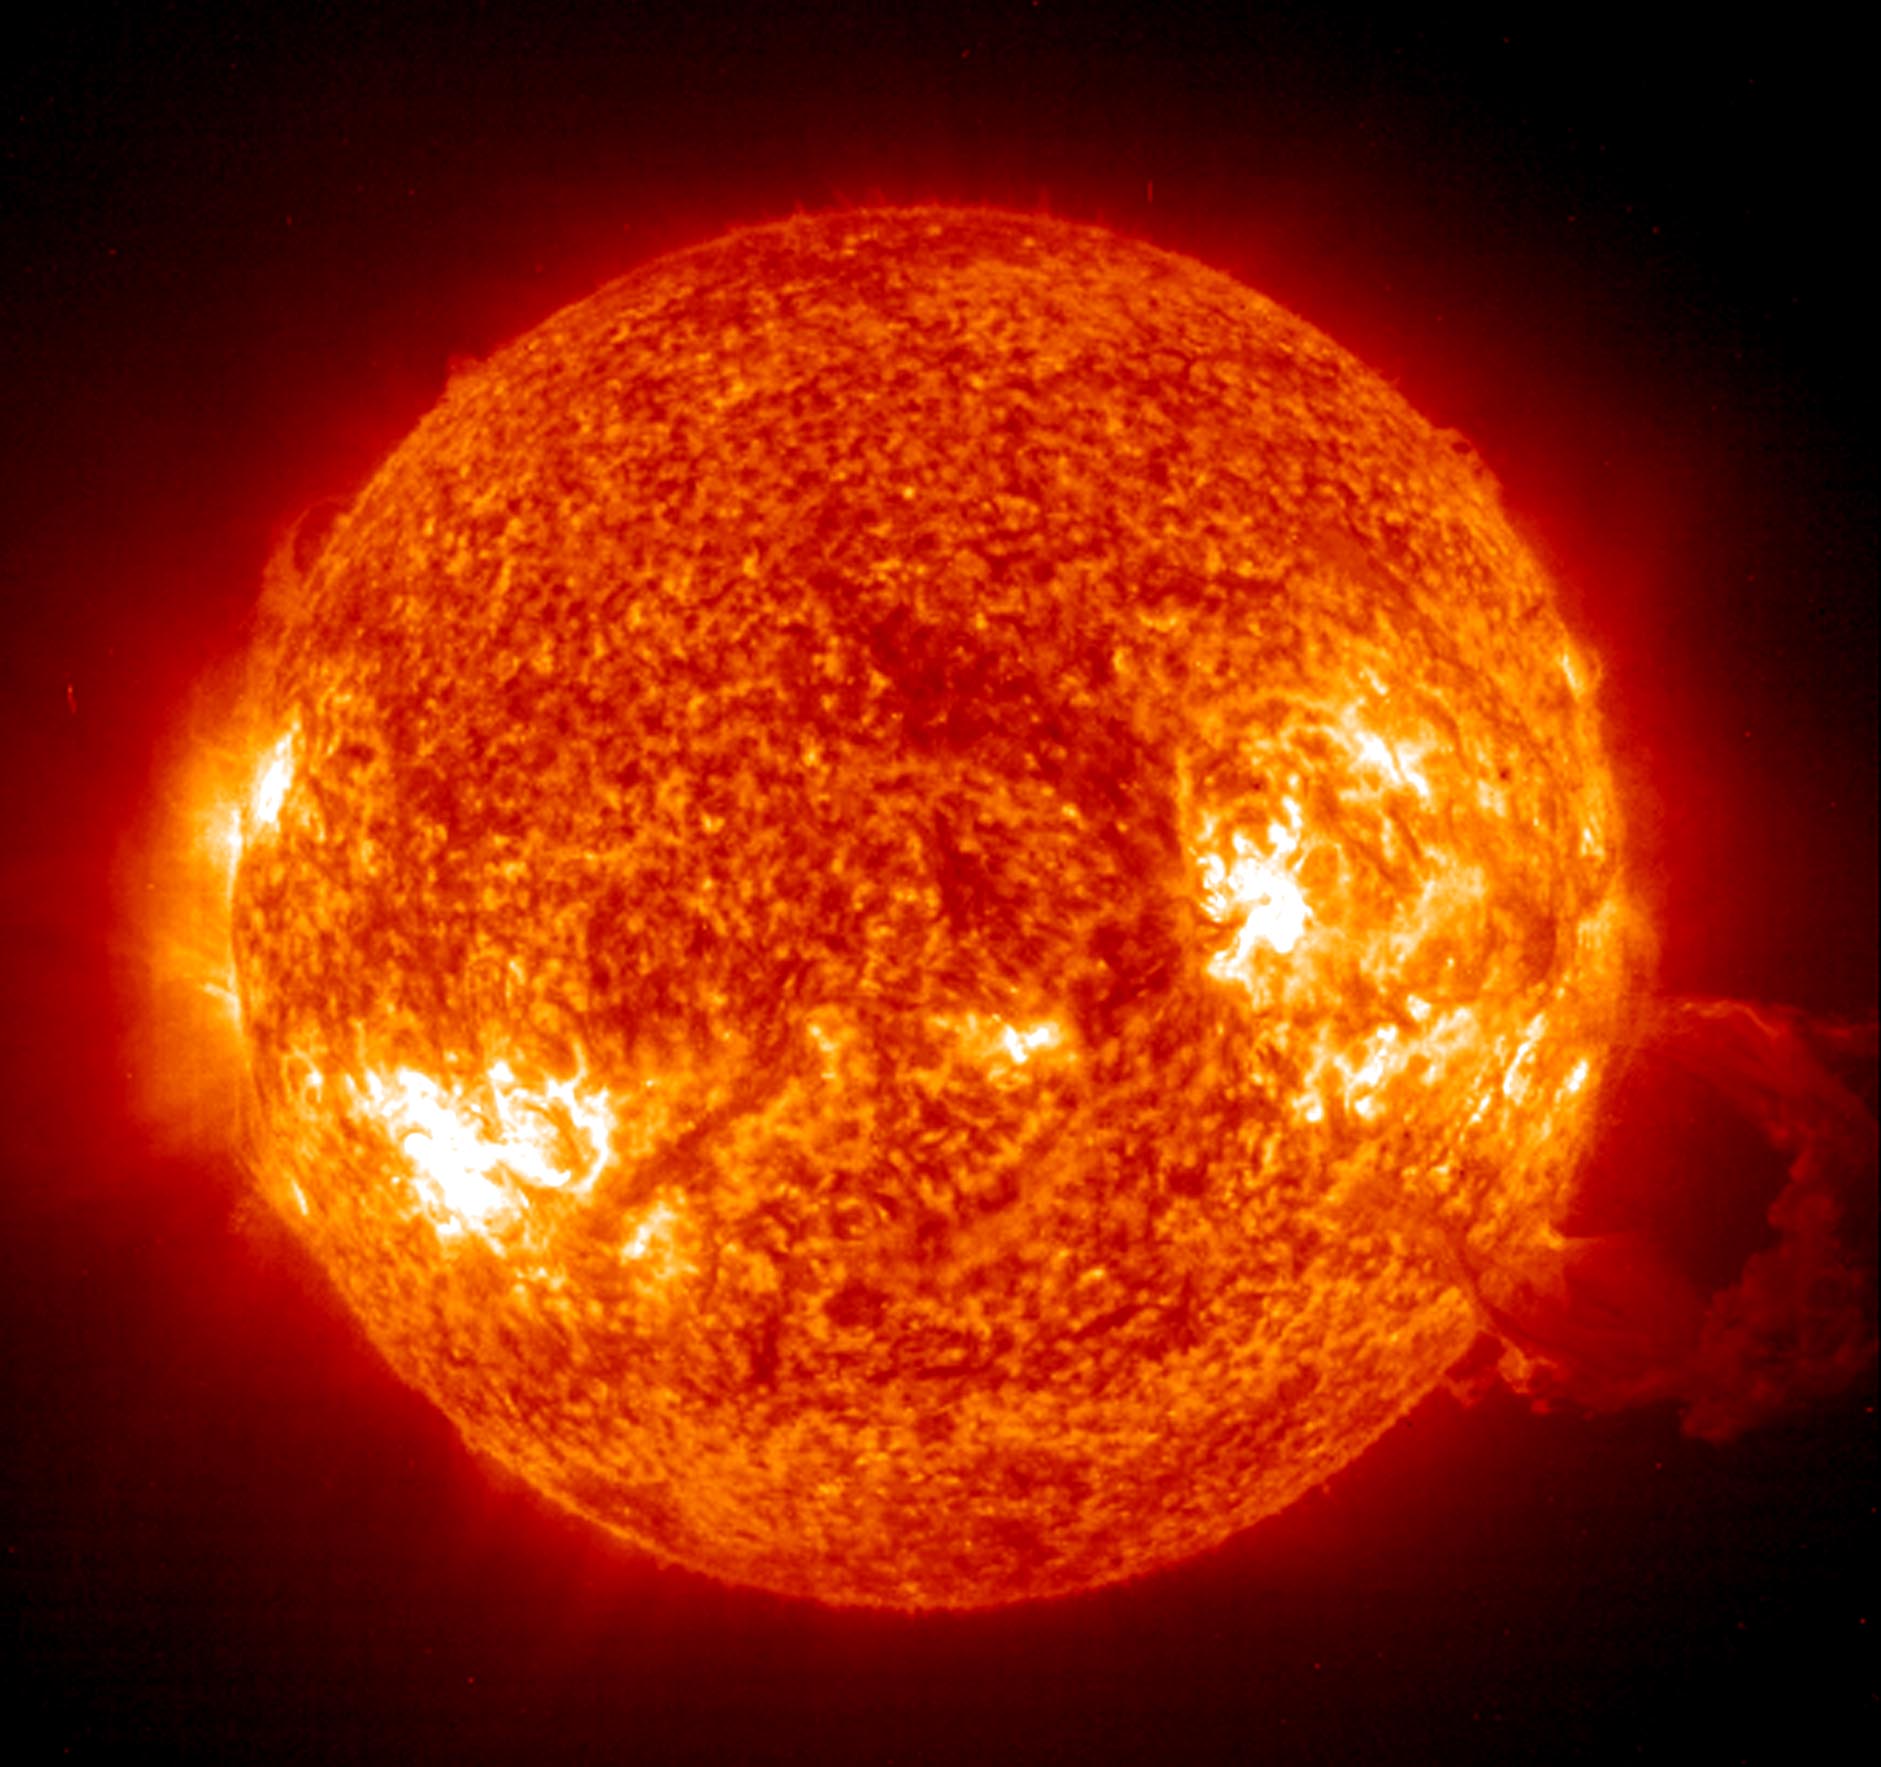 This 26 October, 2003 NASA Solar and Heliospheric Observatory image shows a giant magnetic loop (R) filled with glowing-hot gas blasting away from the Sun. Two Jupiter size sunspots are crossing the face of the Sun at the same time and pose threats for X-class solar flares, major events that can trigger planet-wide radio blackouts and long-lasting radiation storms. AFP PHOTO/NASA